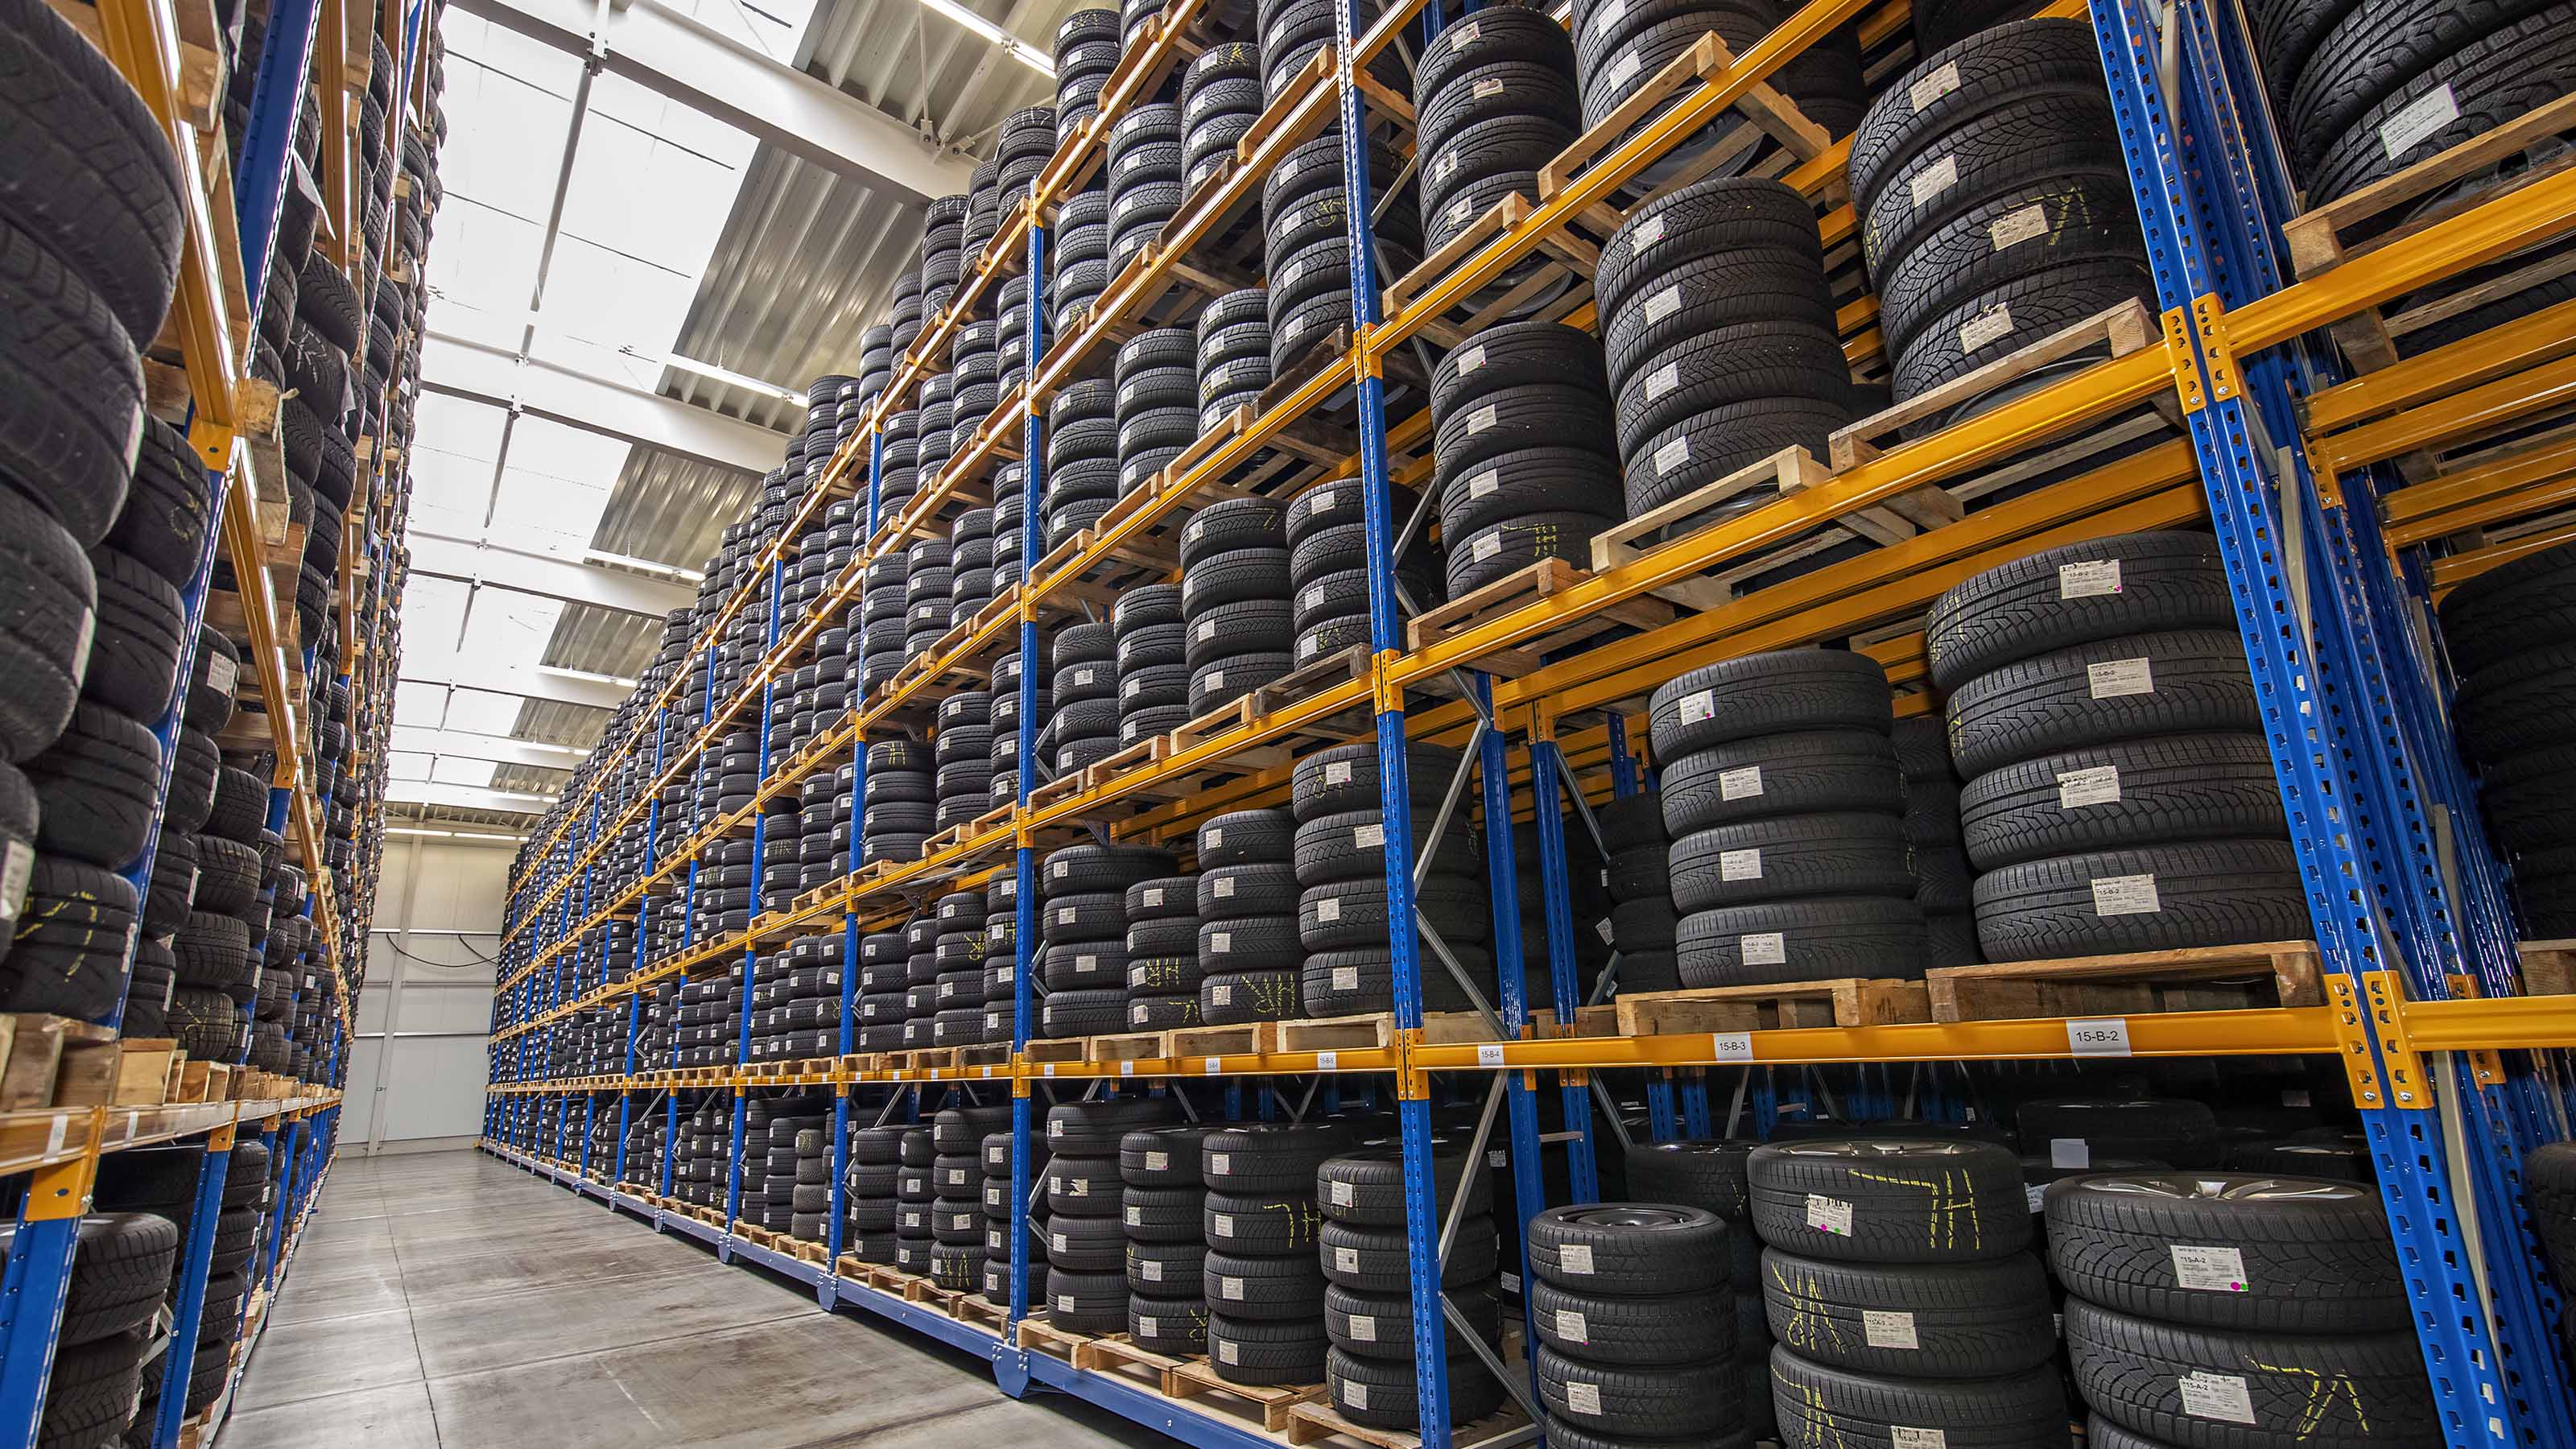 warehouse footprint grows thanks to tax incentives. How